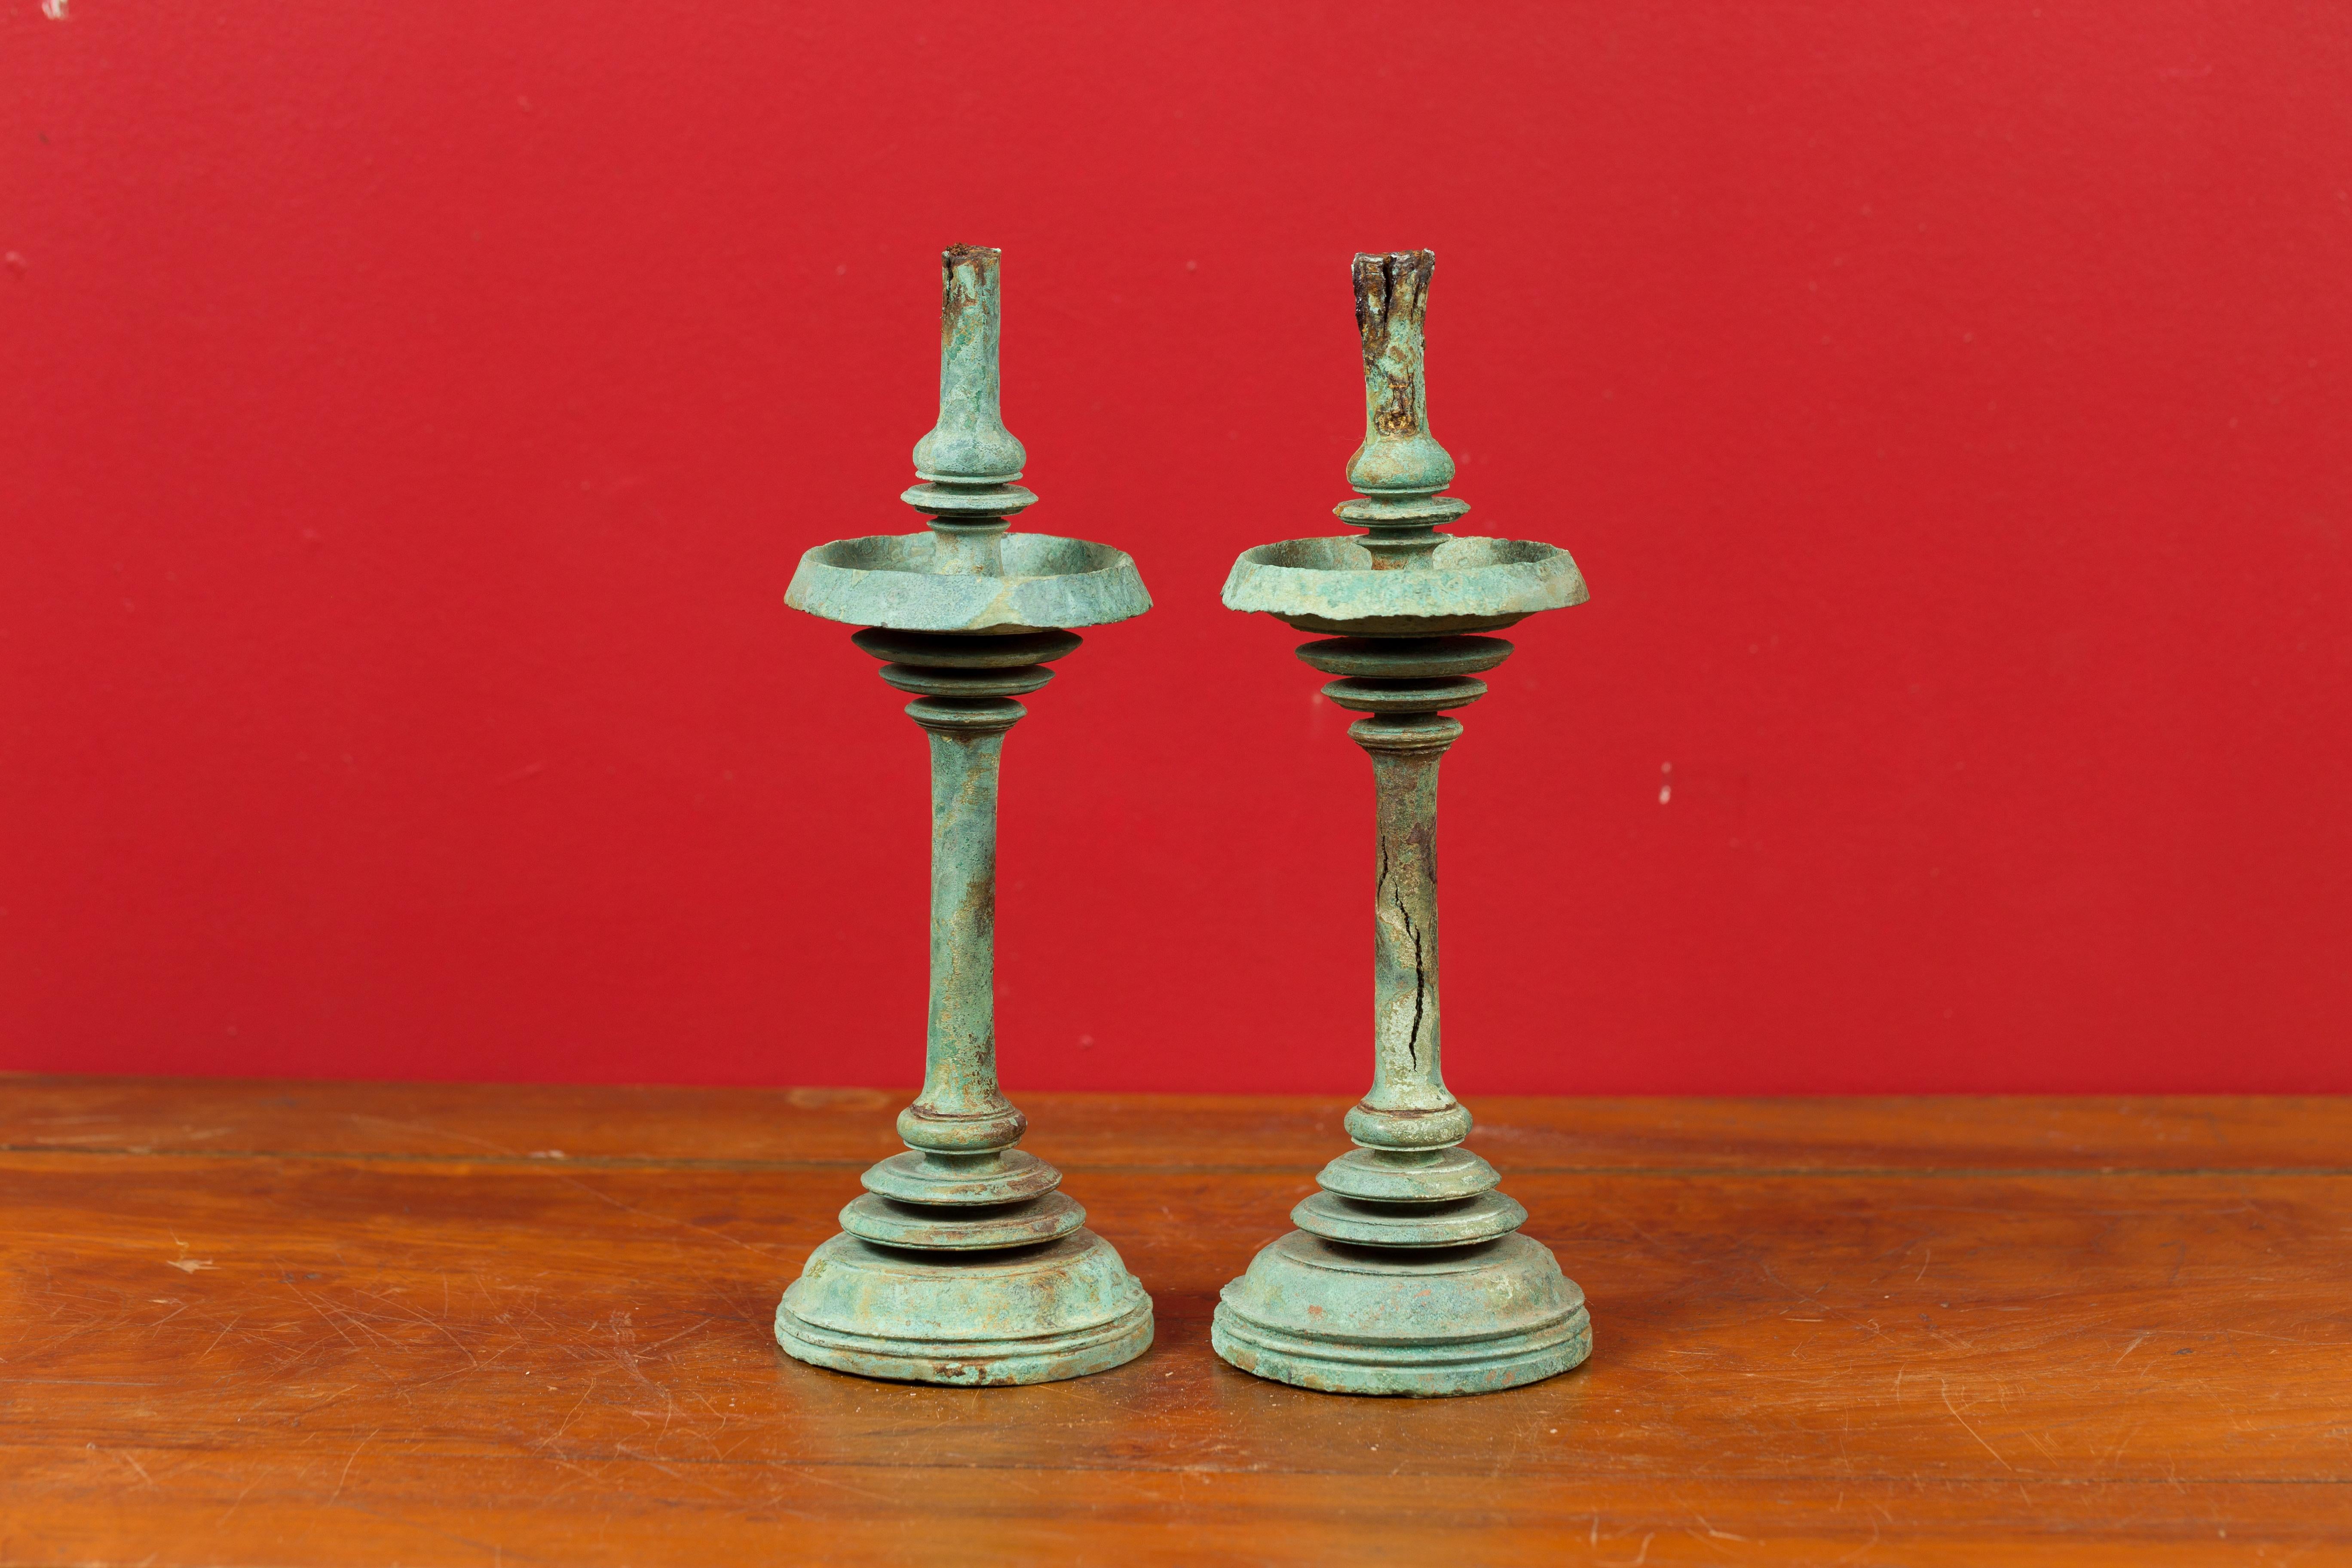 Cambodian Pair of Angkor-Wat 12th Century Bronze Temple Oil Lamps from the Khmer Empire